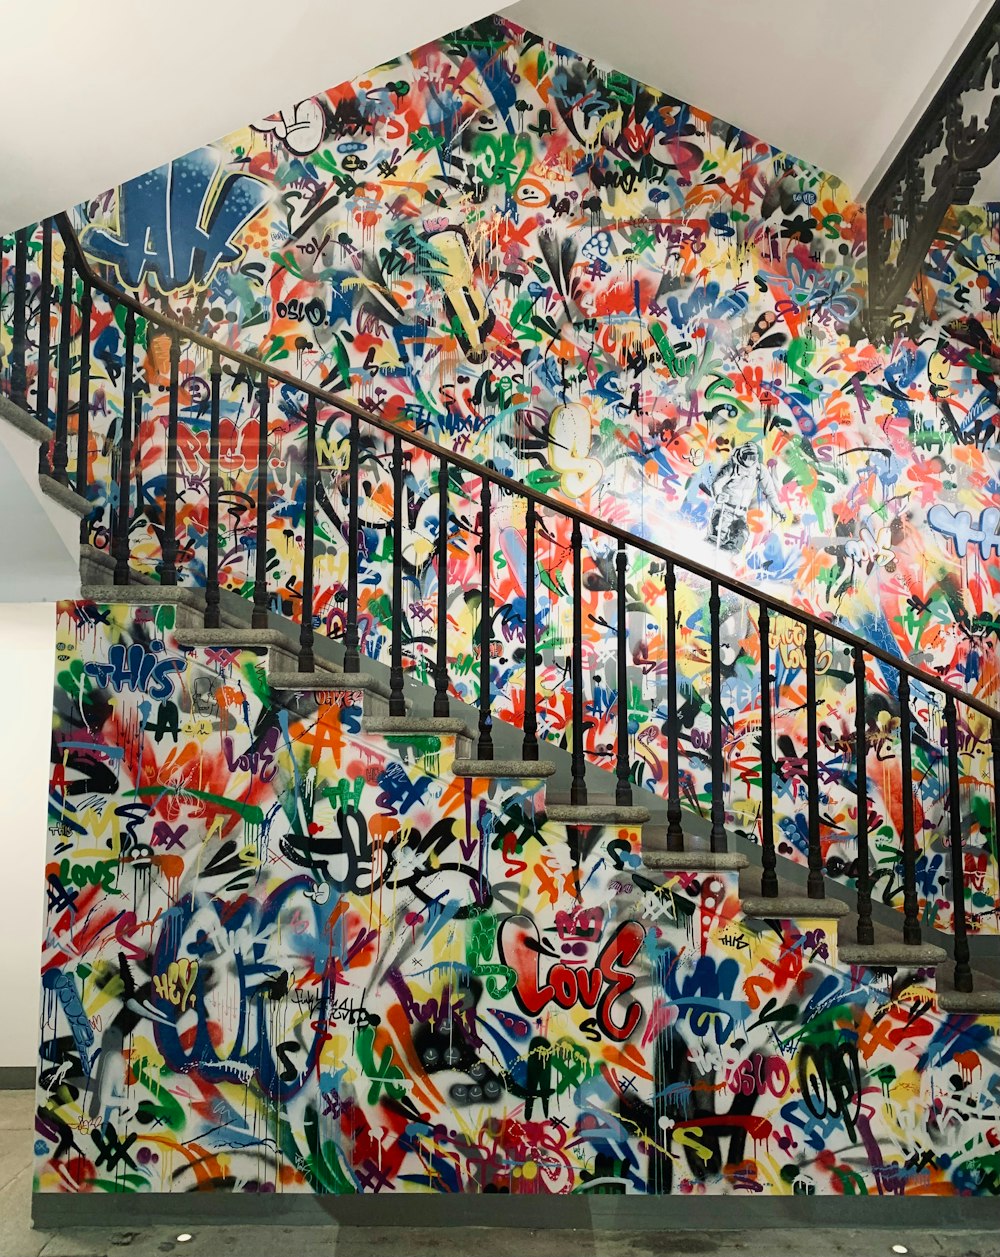 a stair case with graffiti painted on it